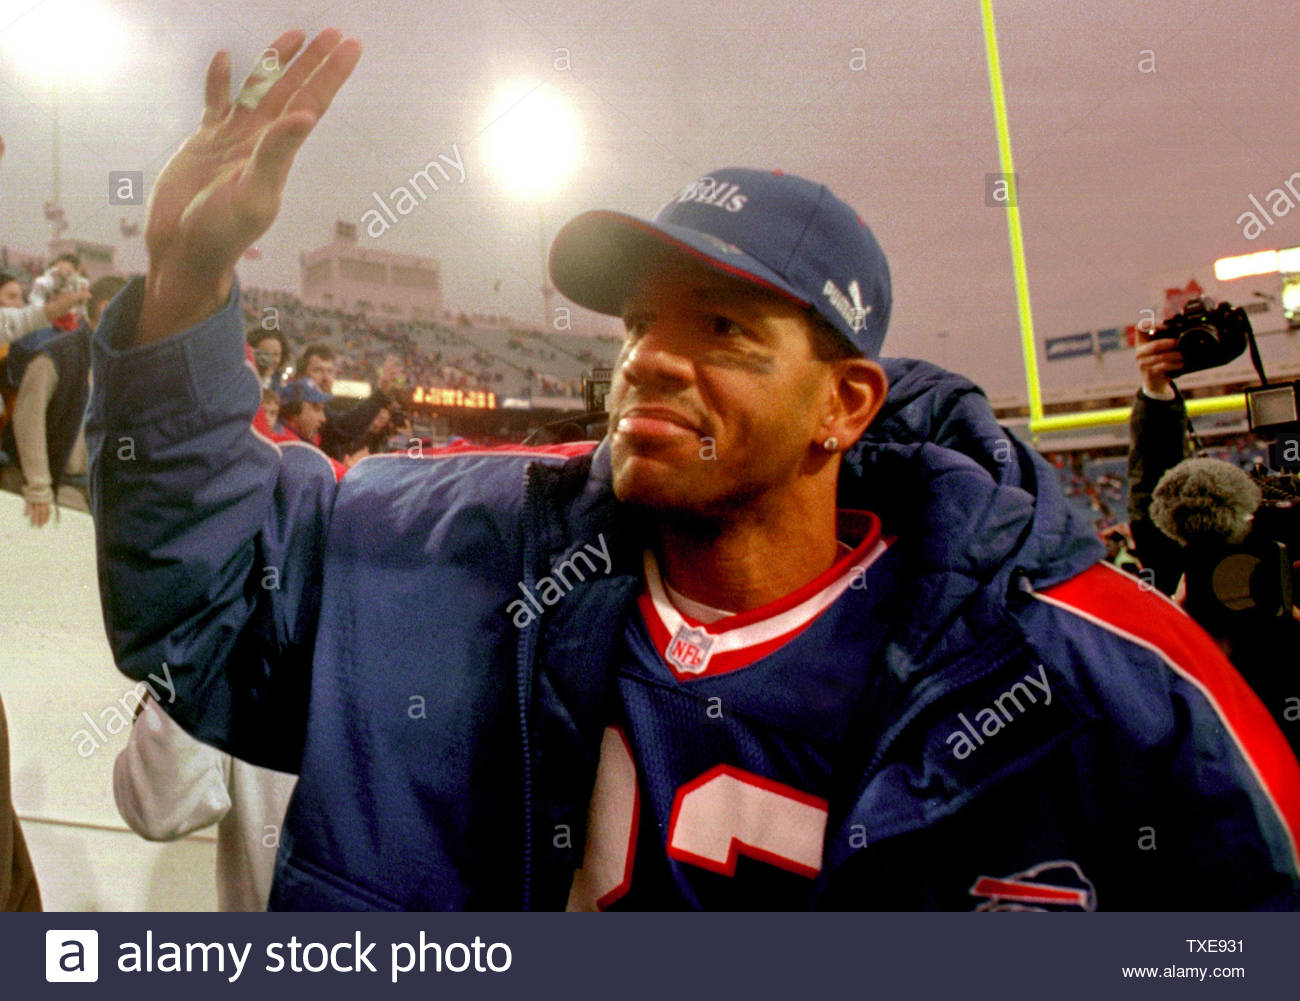 buf 02 january 2000 buffalo new york usa buffalo bills wide receiver andre reed waves to fans as he makes an emotional farewell after be ing the nfls all time second best receiver with 941 catches january 2 reed who may not be back with the bills because of the salary cap snagged 5 passes for 43 yards as the bills beat the colts 31 6 at ralph wilson stadium rggwgary wiepert upi TXE931